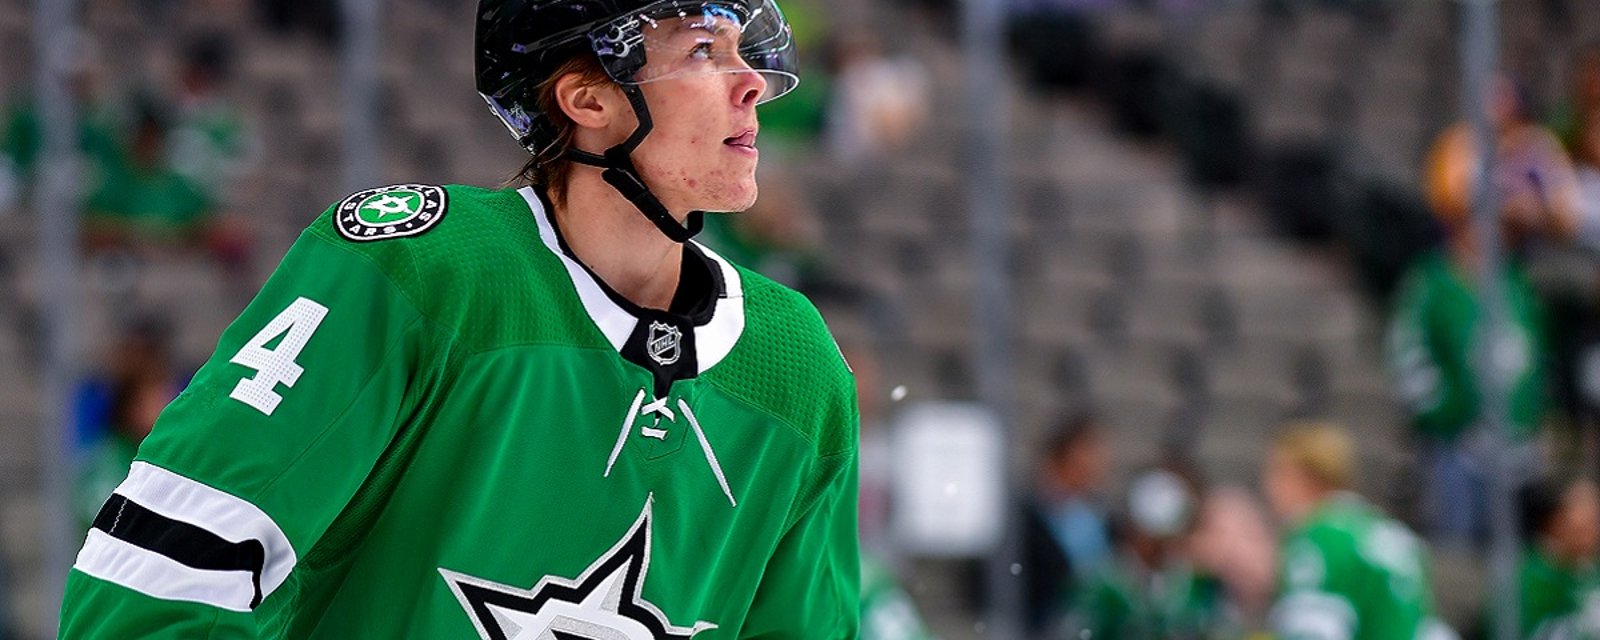 Heiskanen throws shade at the Calder nominations and the NHL after being snubbed.